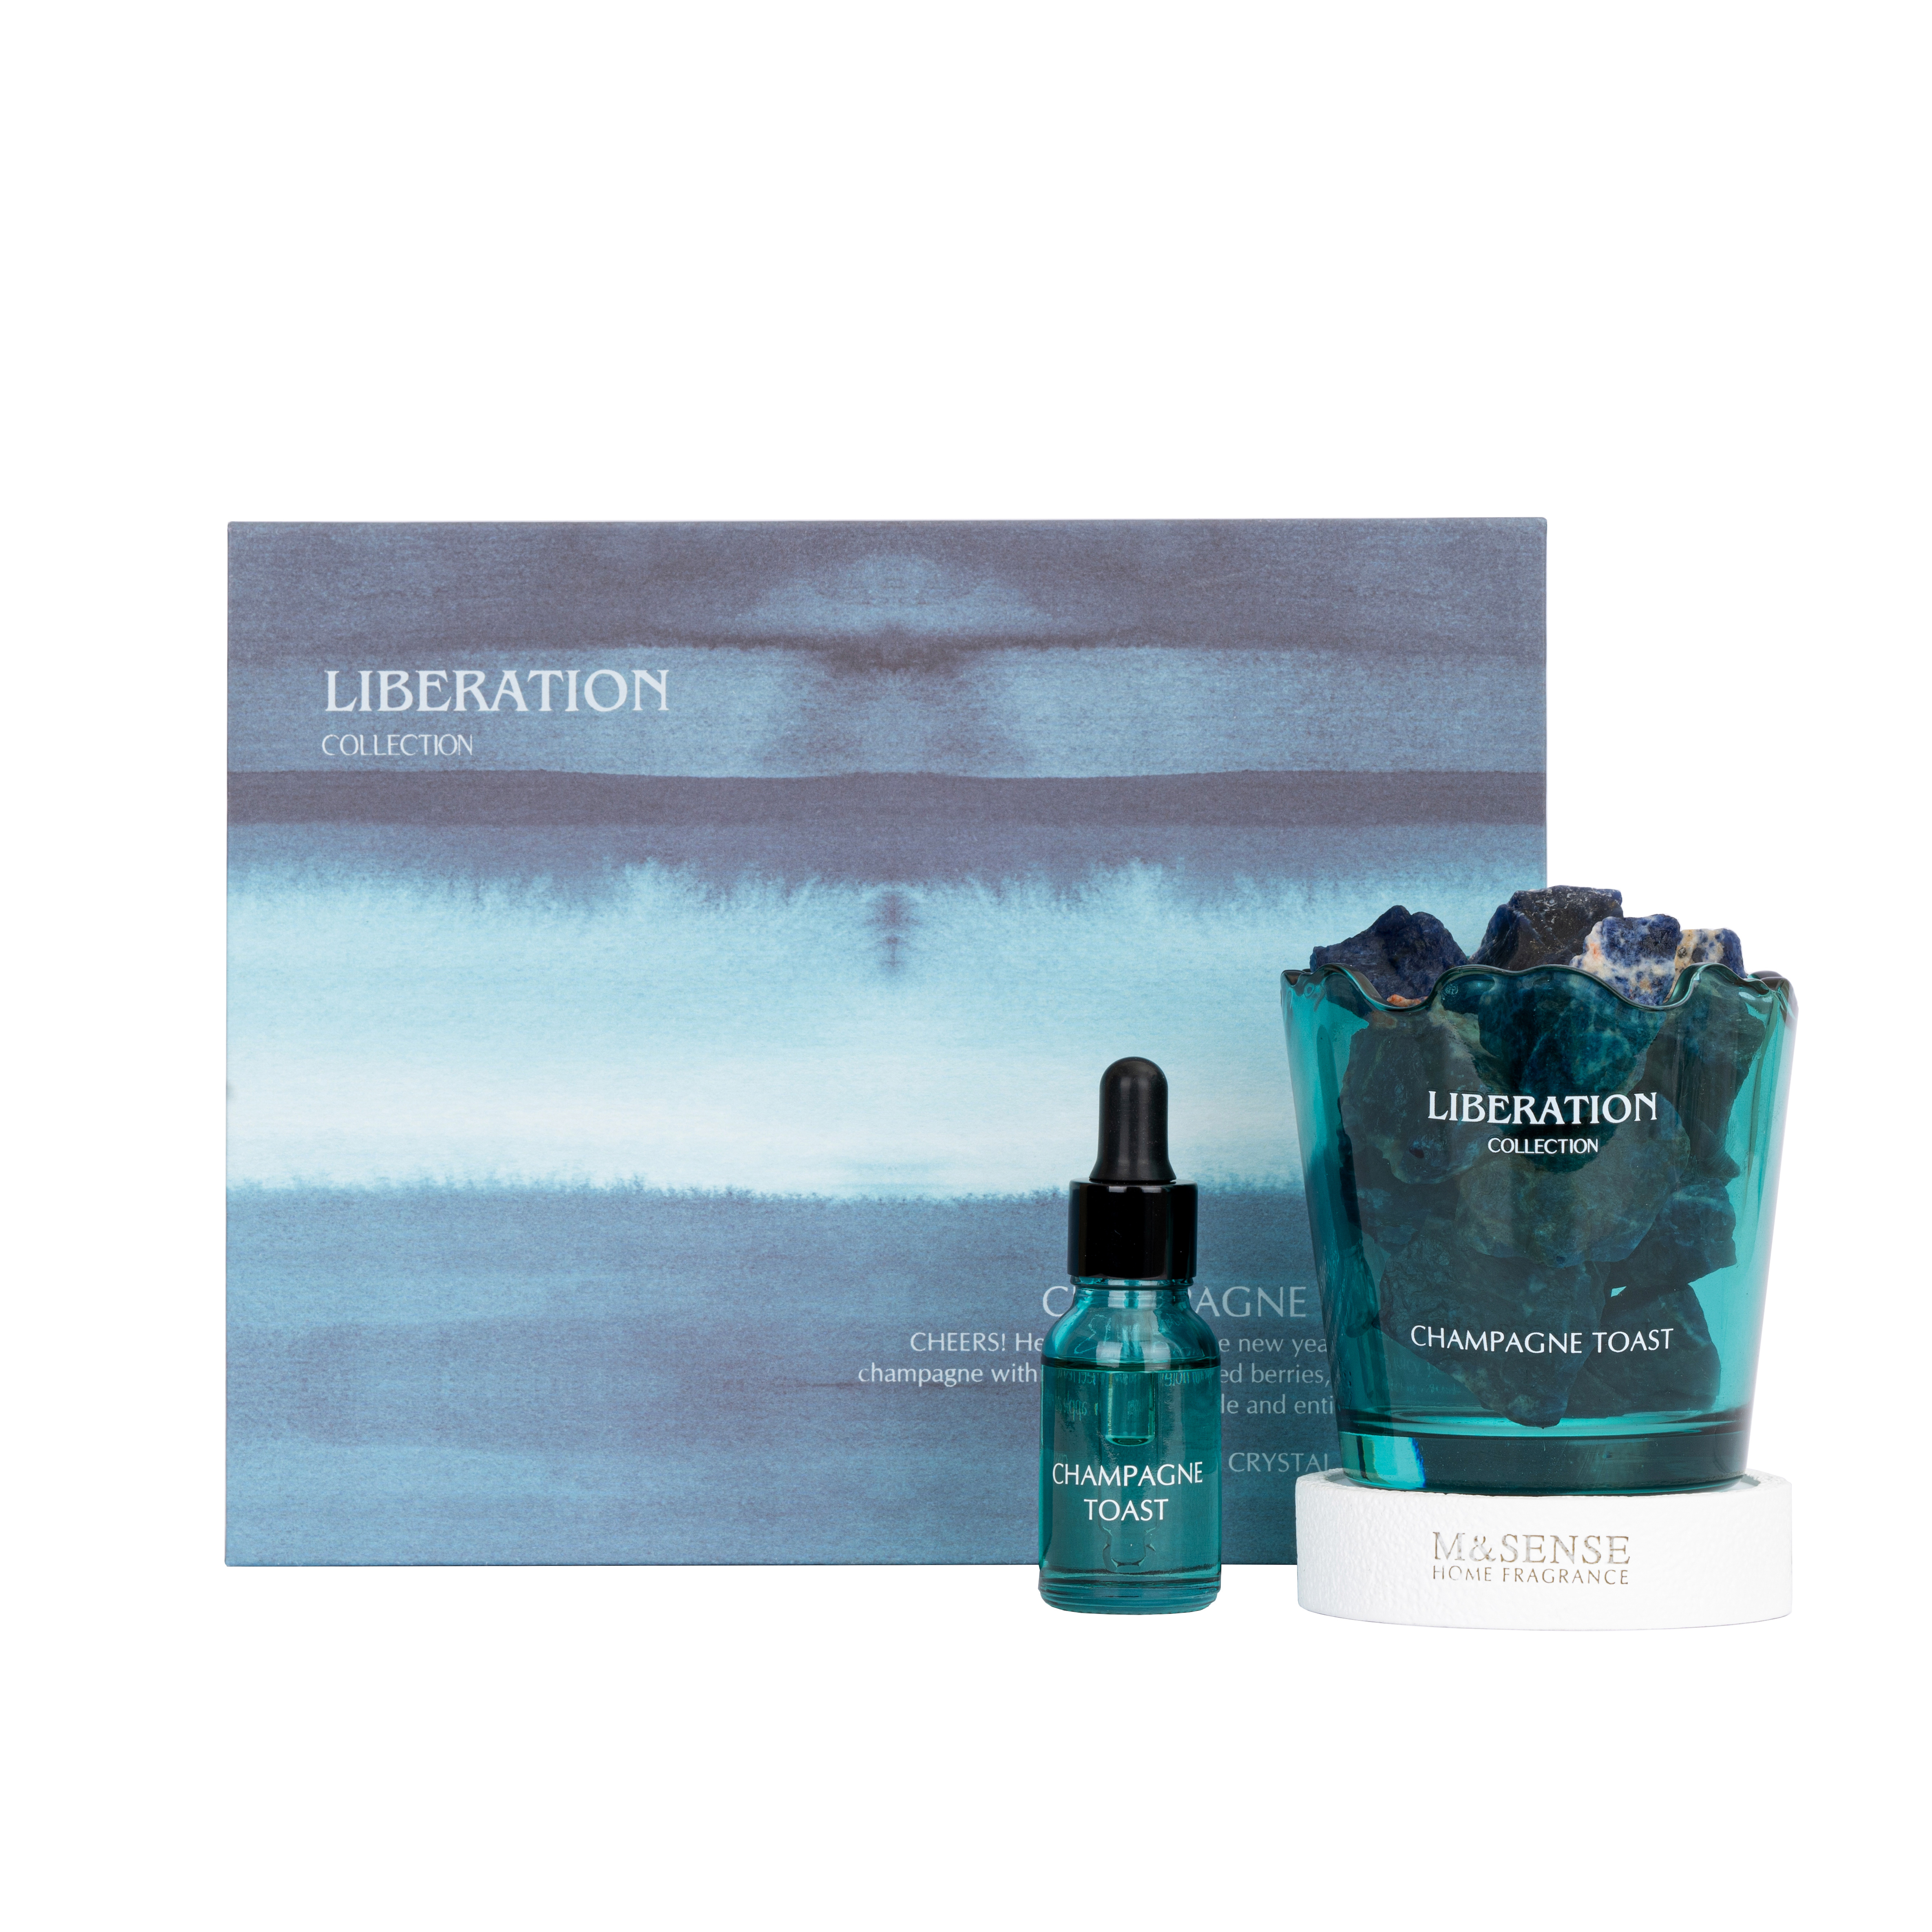 LIBERATION Collection Champagne Toast 15ml Essential Oil And 280g Scented Crystal Stone Gift Set 